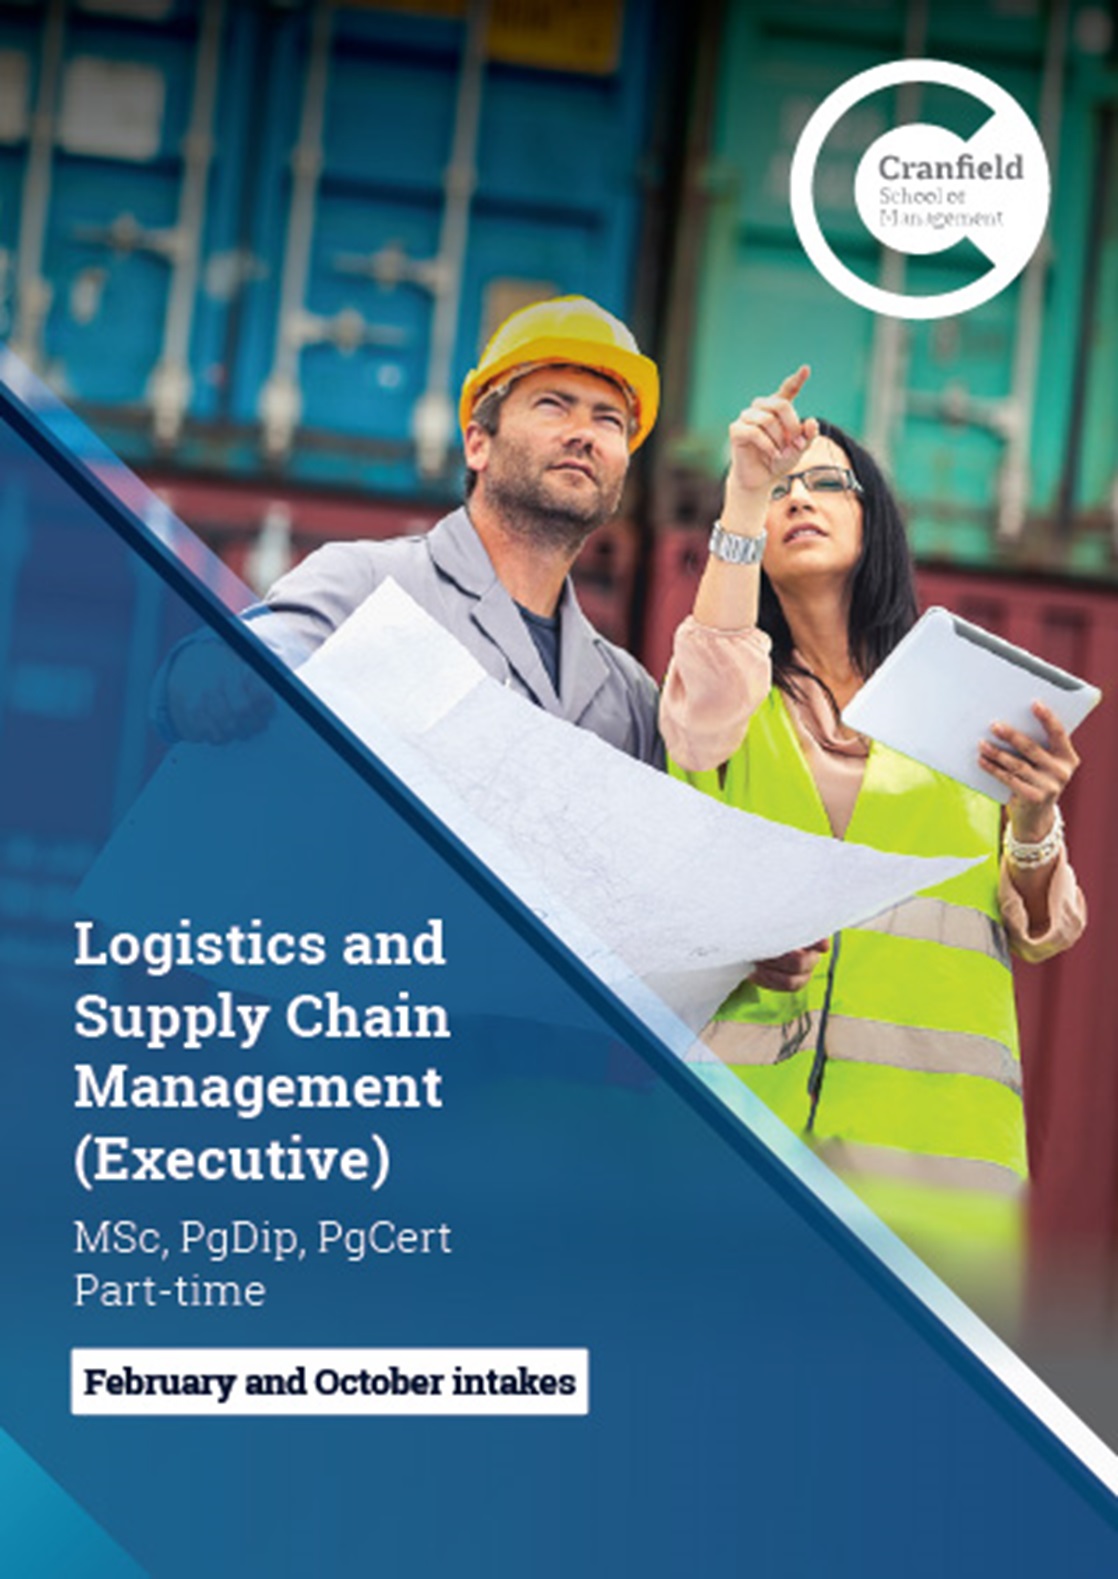 Logistics and Supply Chain Management MSc (Executive)